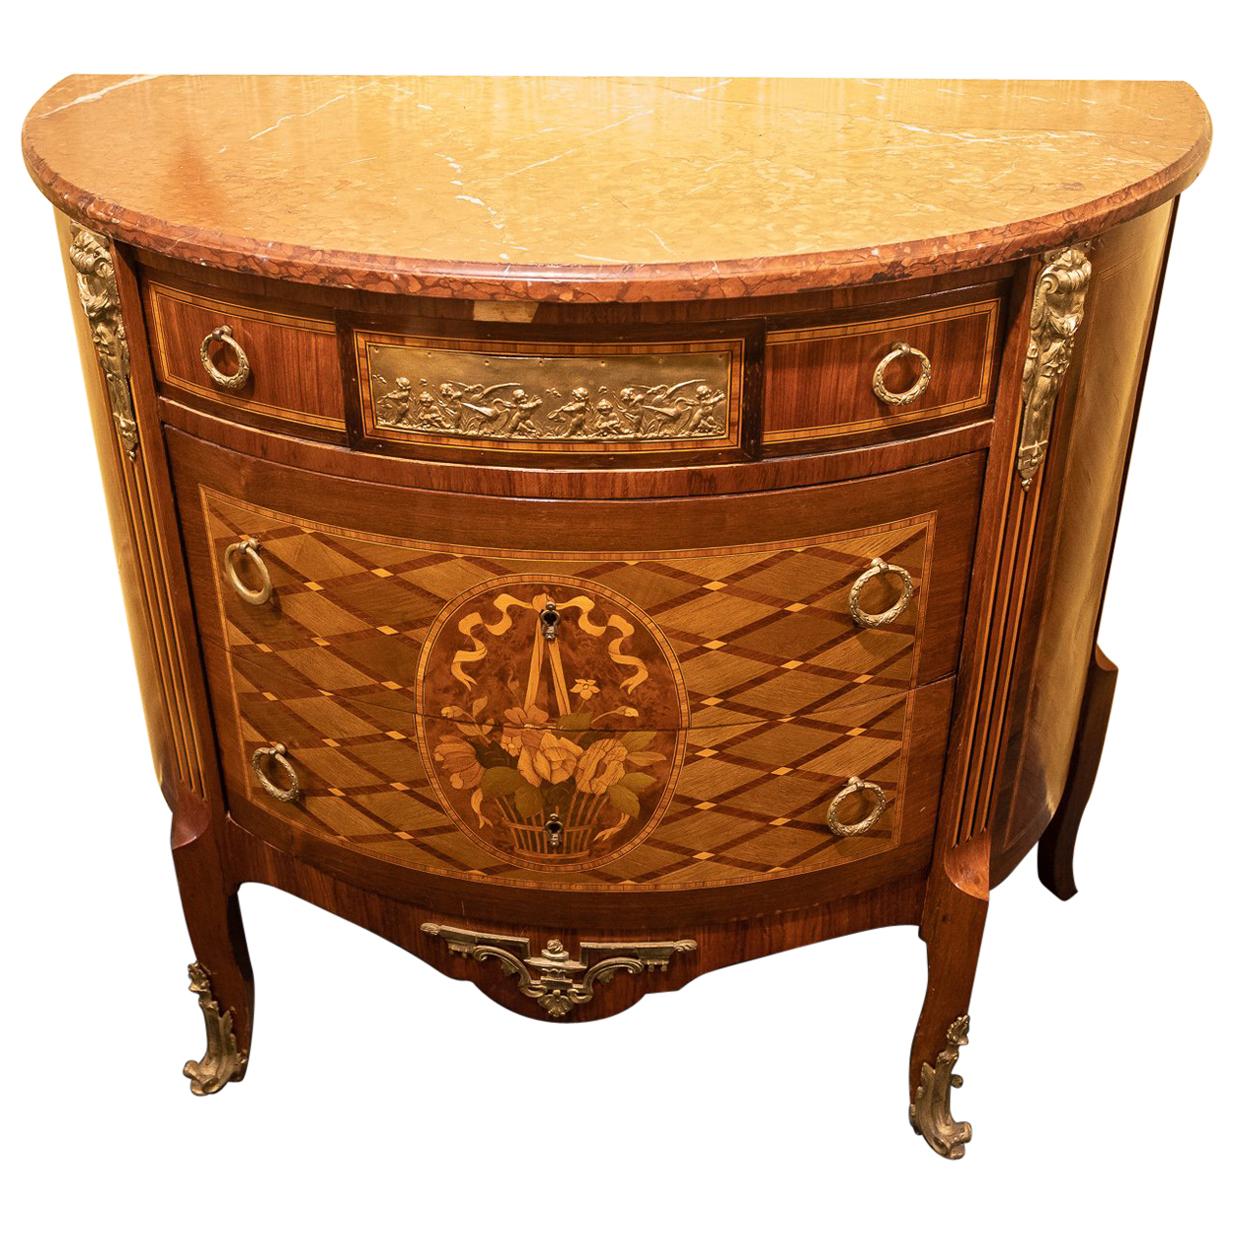 19th Century French Louis XVI Style Demilune Marble-Top Commode